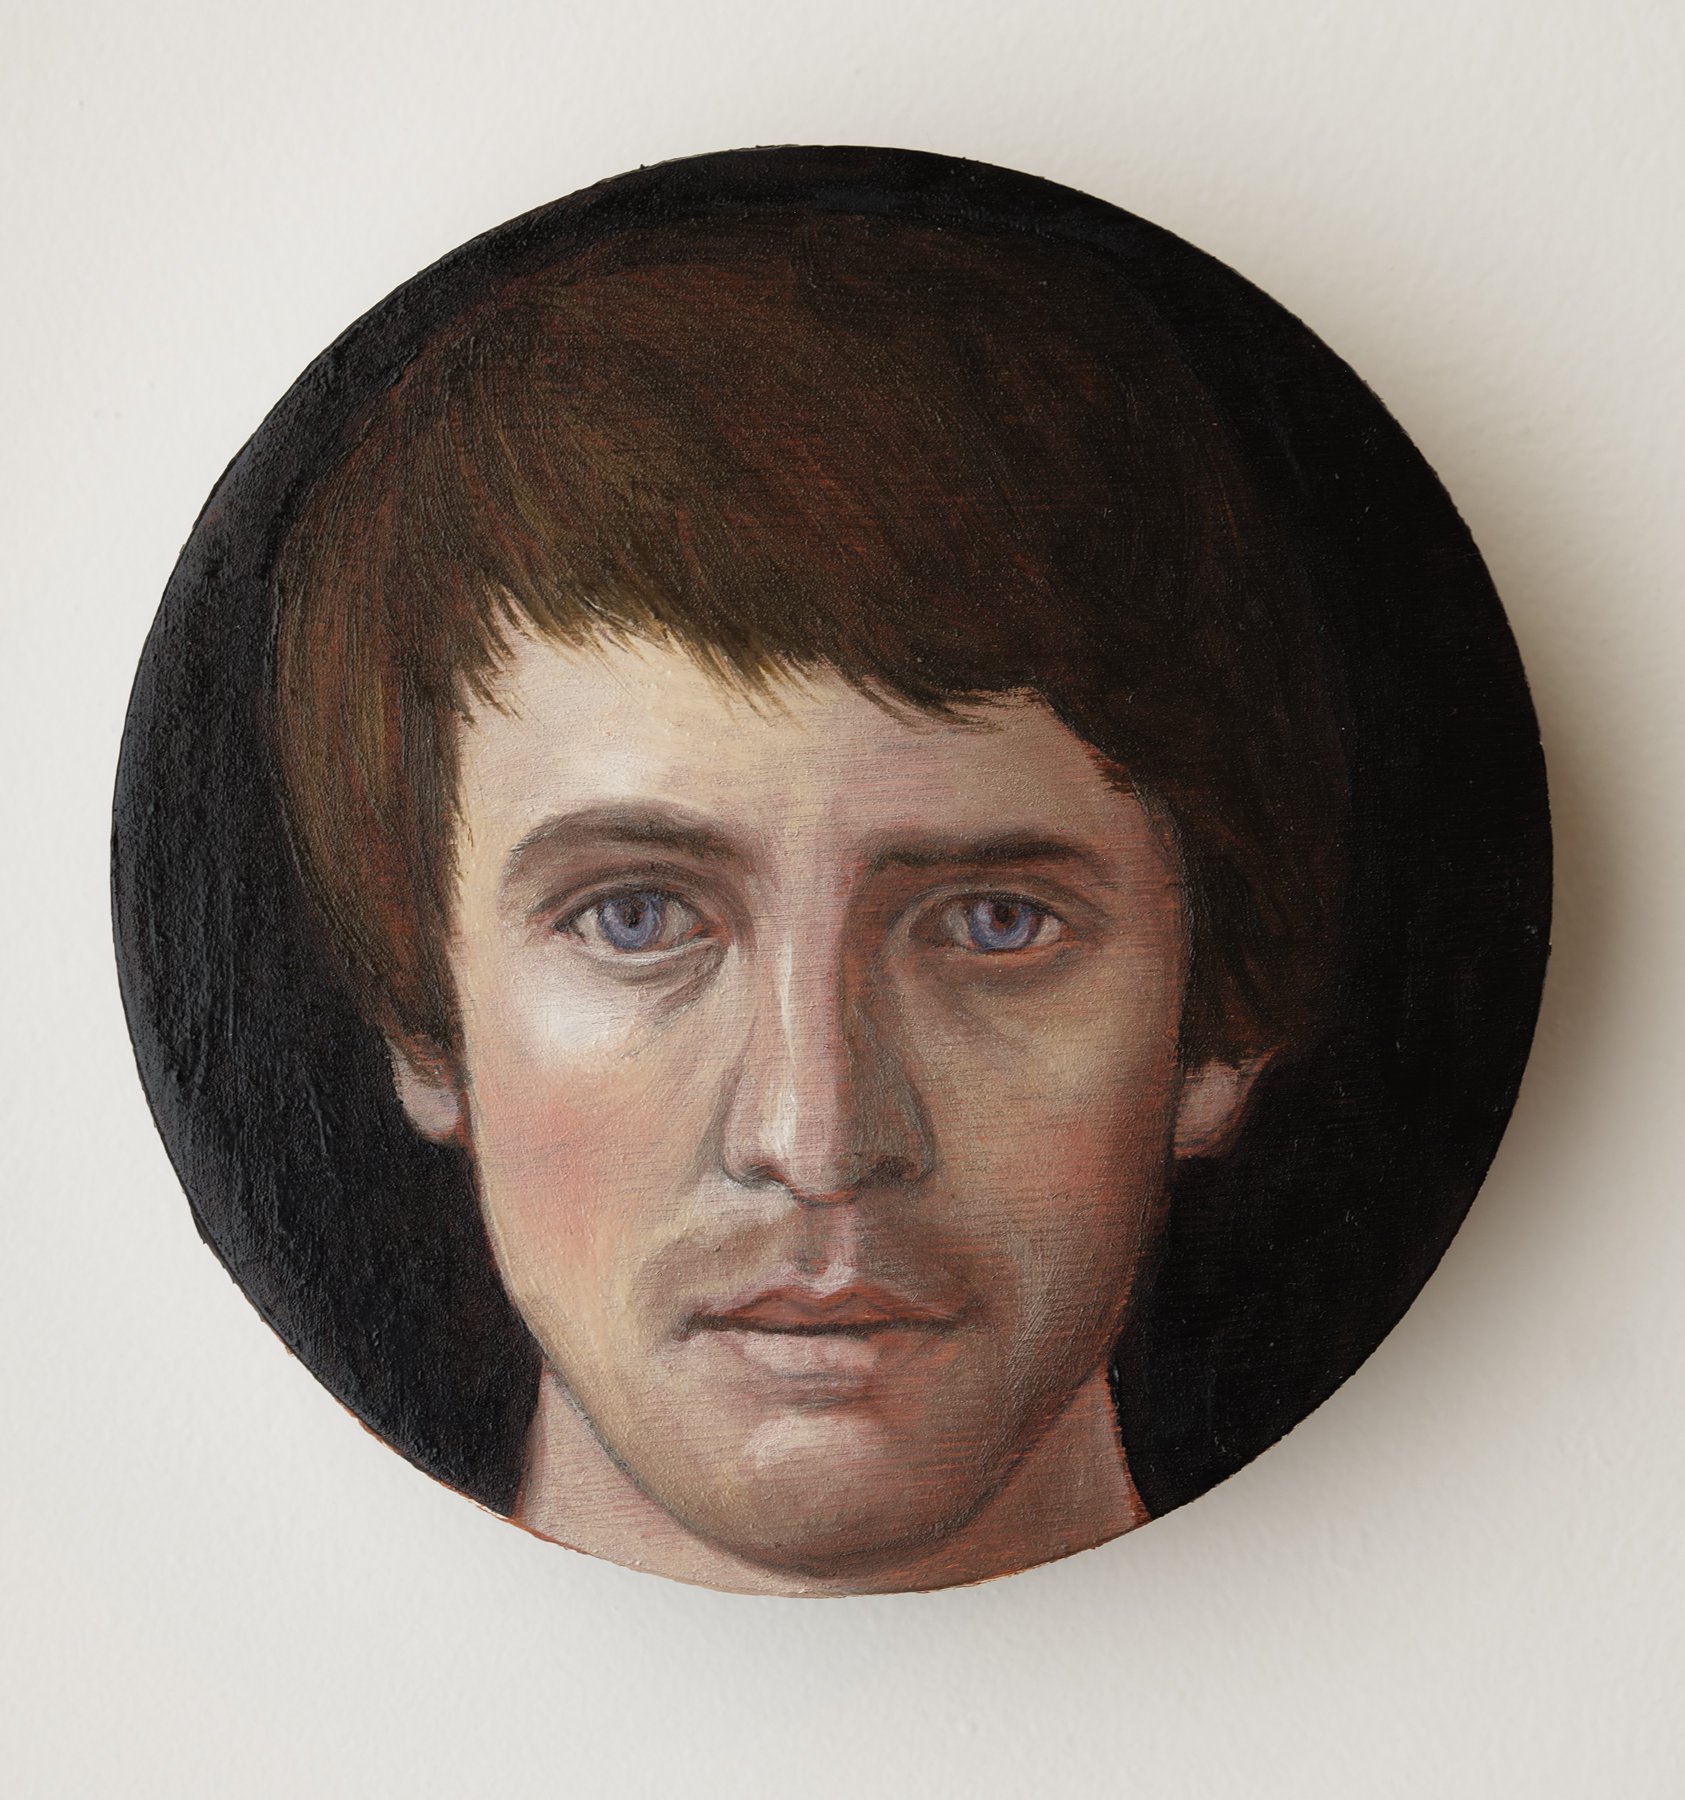 The Visitor, 2022. Oil on panel. 6" diameter